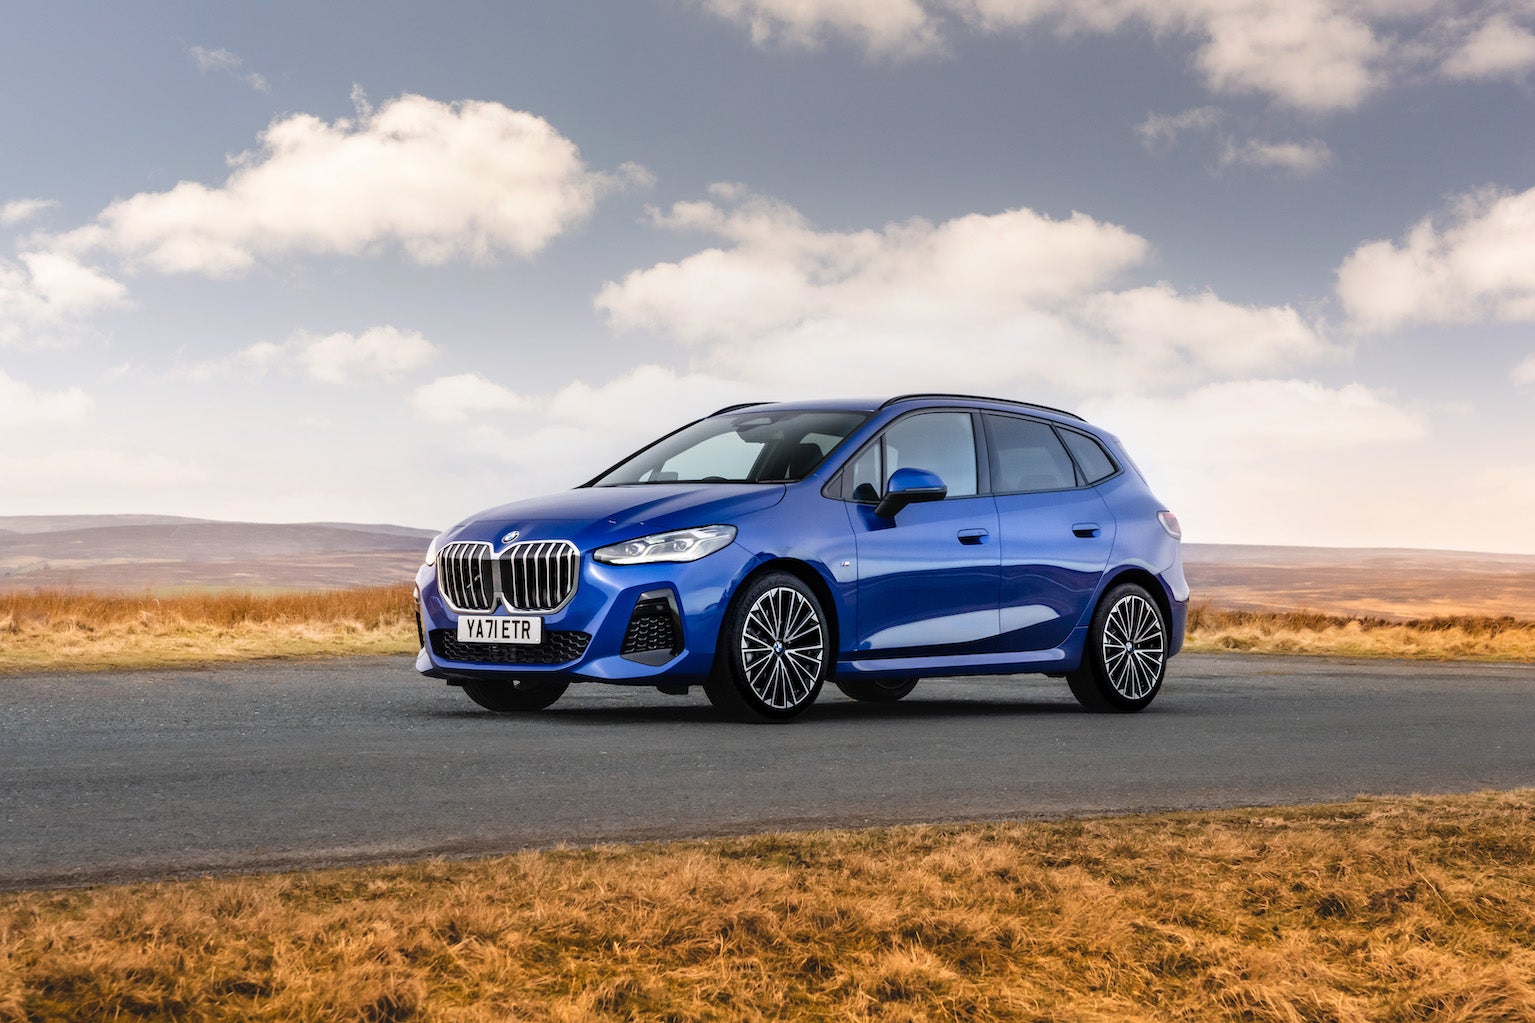 2022 BMW 2 Series Active Tourer Revealed With Large Grille, All